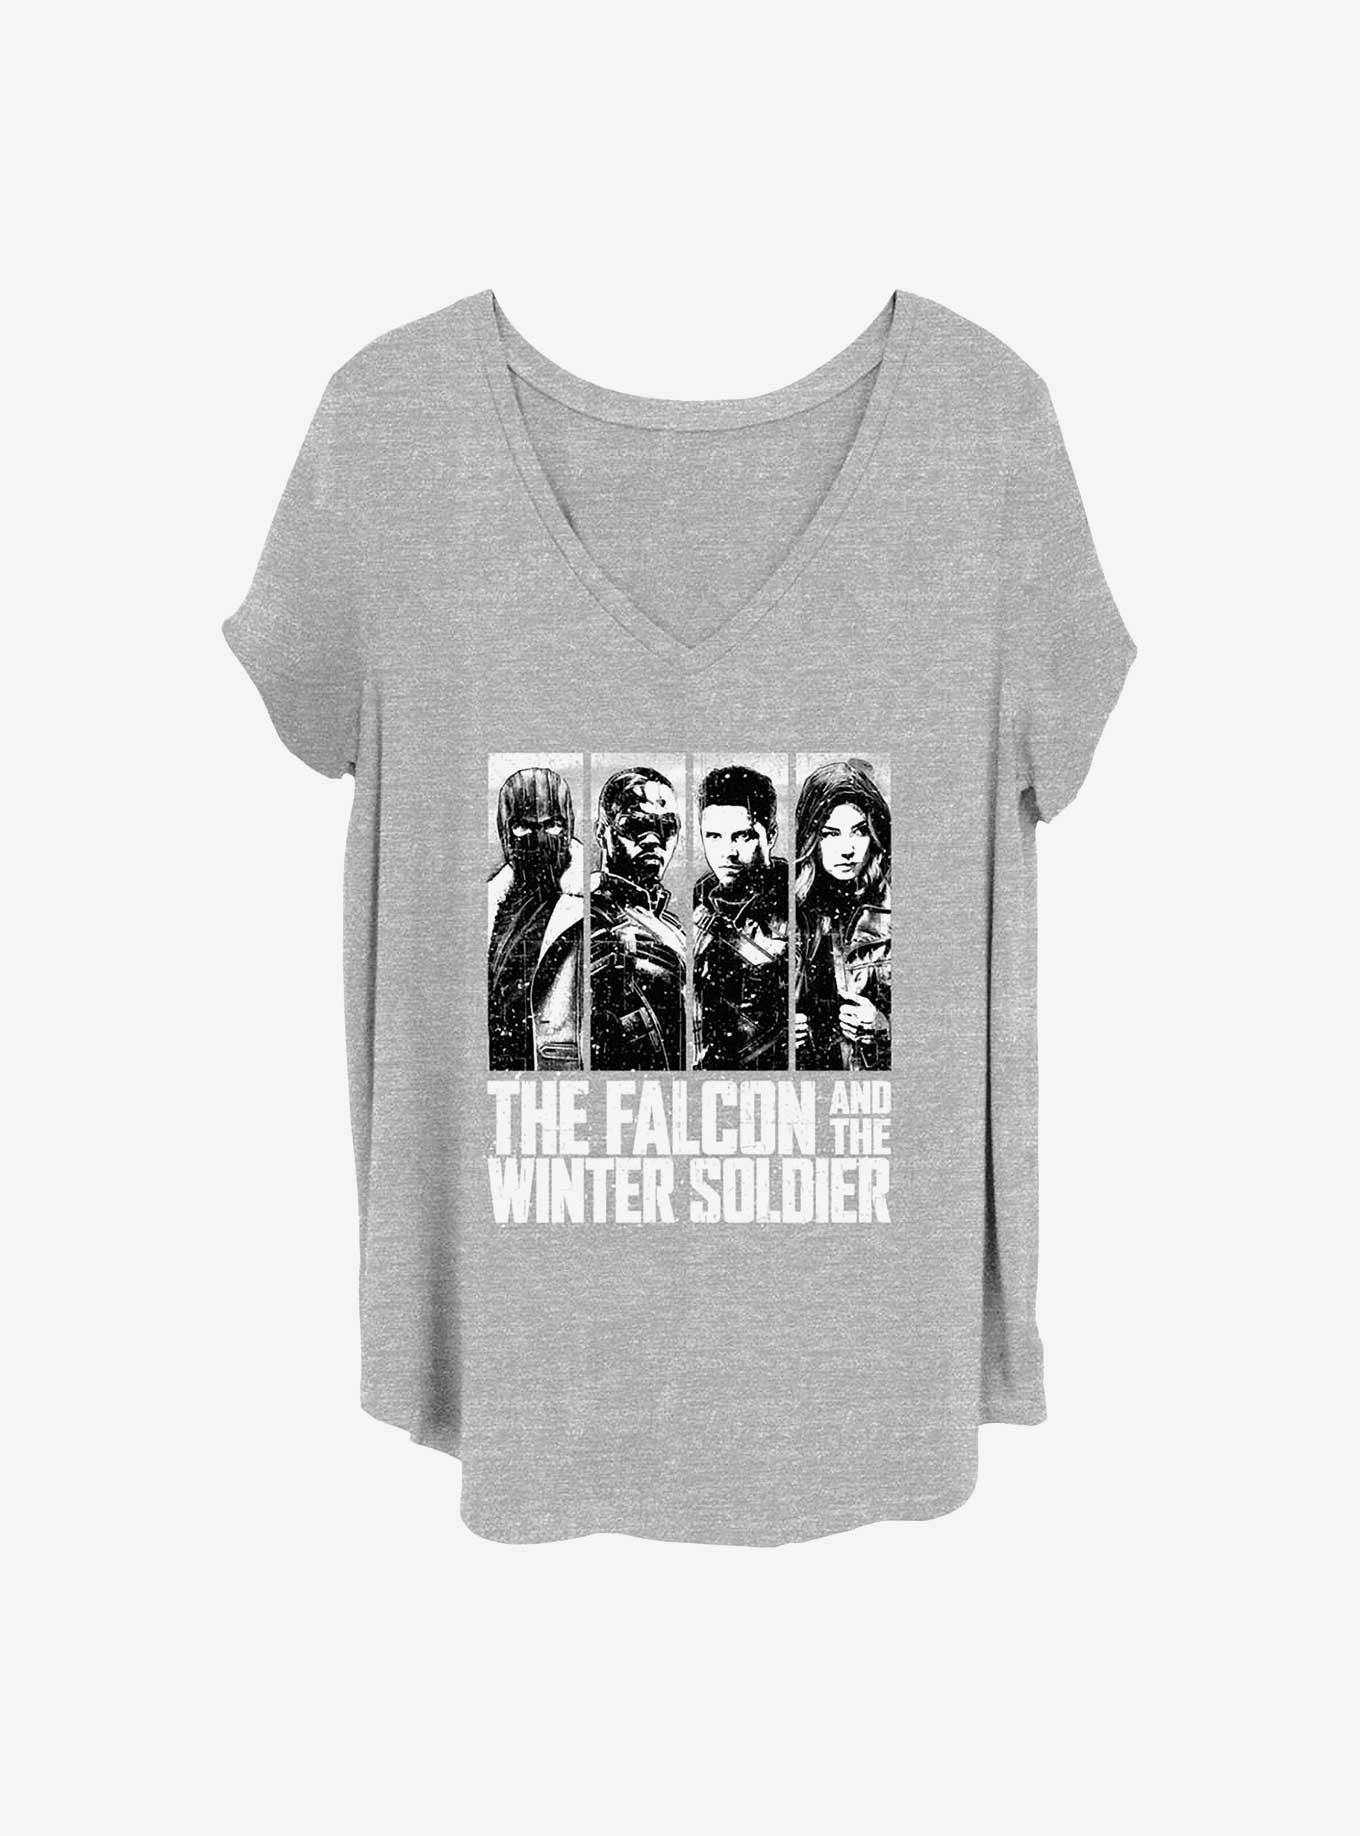 Marvel The Falcon and the Winter Soldier White Out Girls T-Shirt Plus Size, HEATHER GR, hi-res